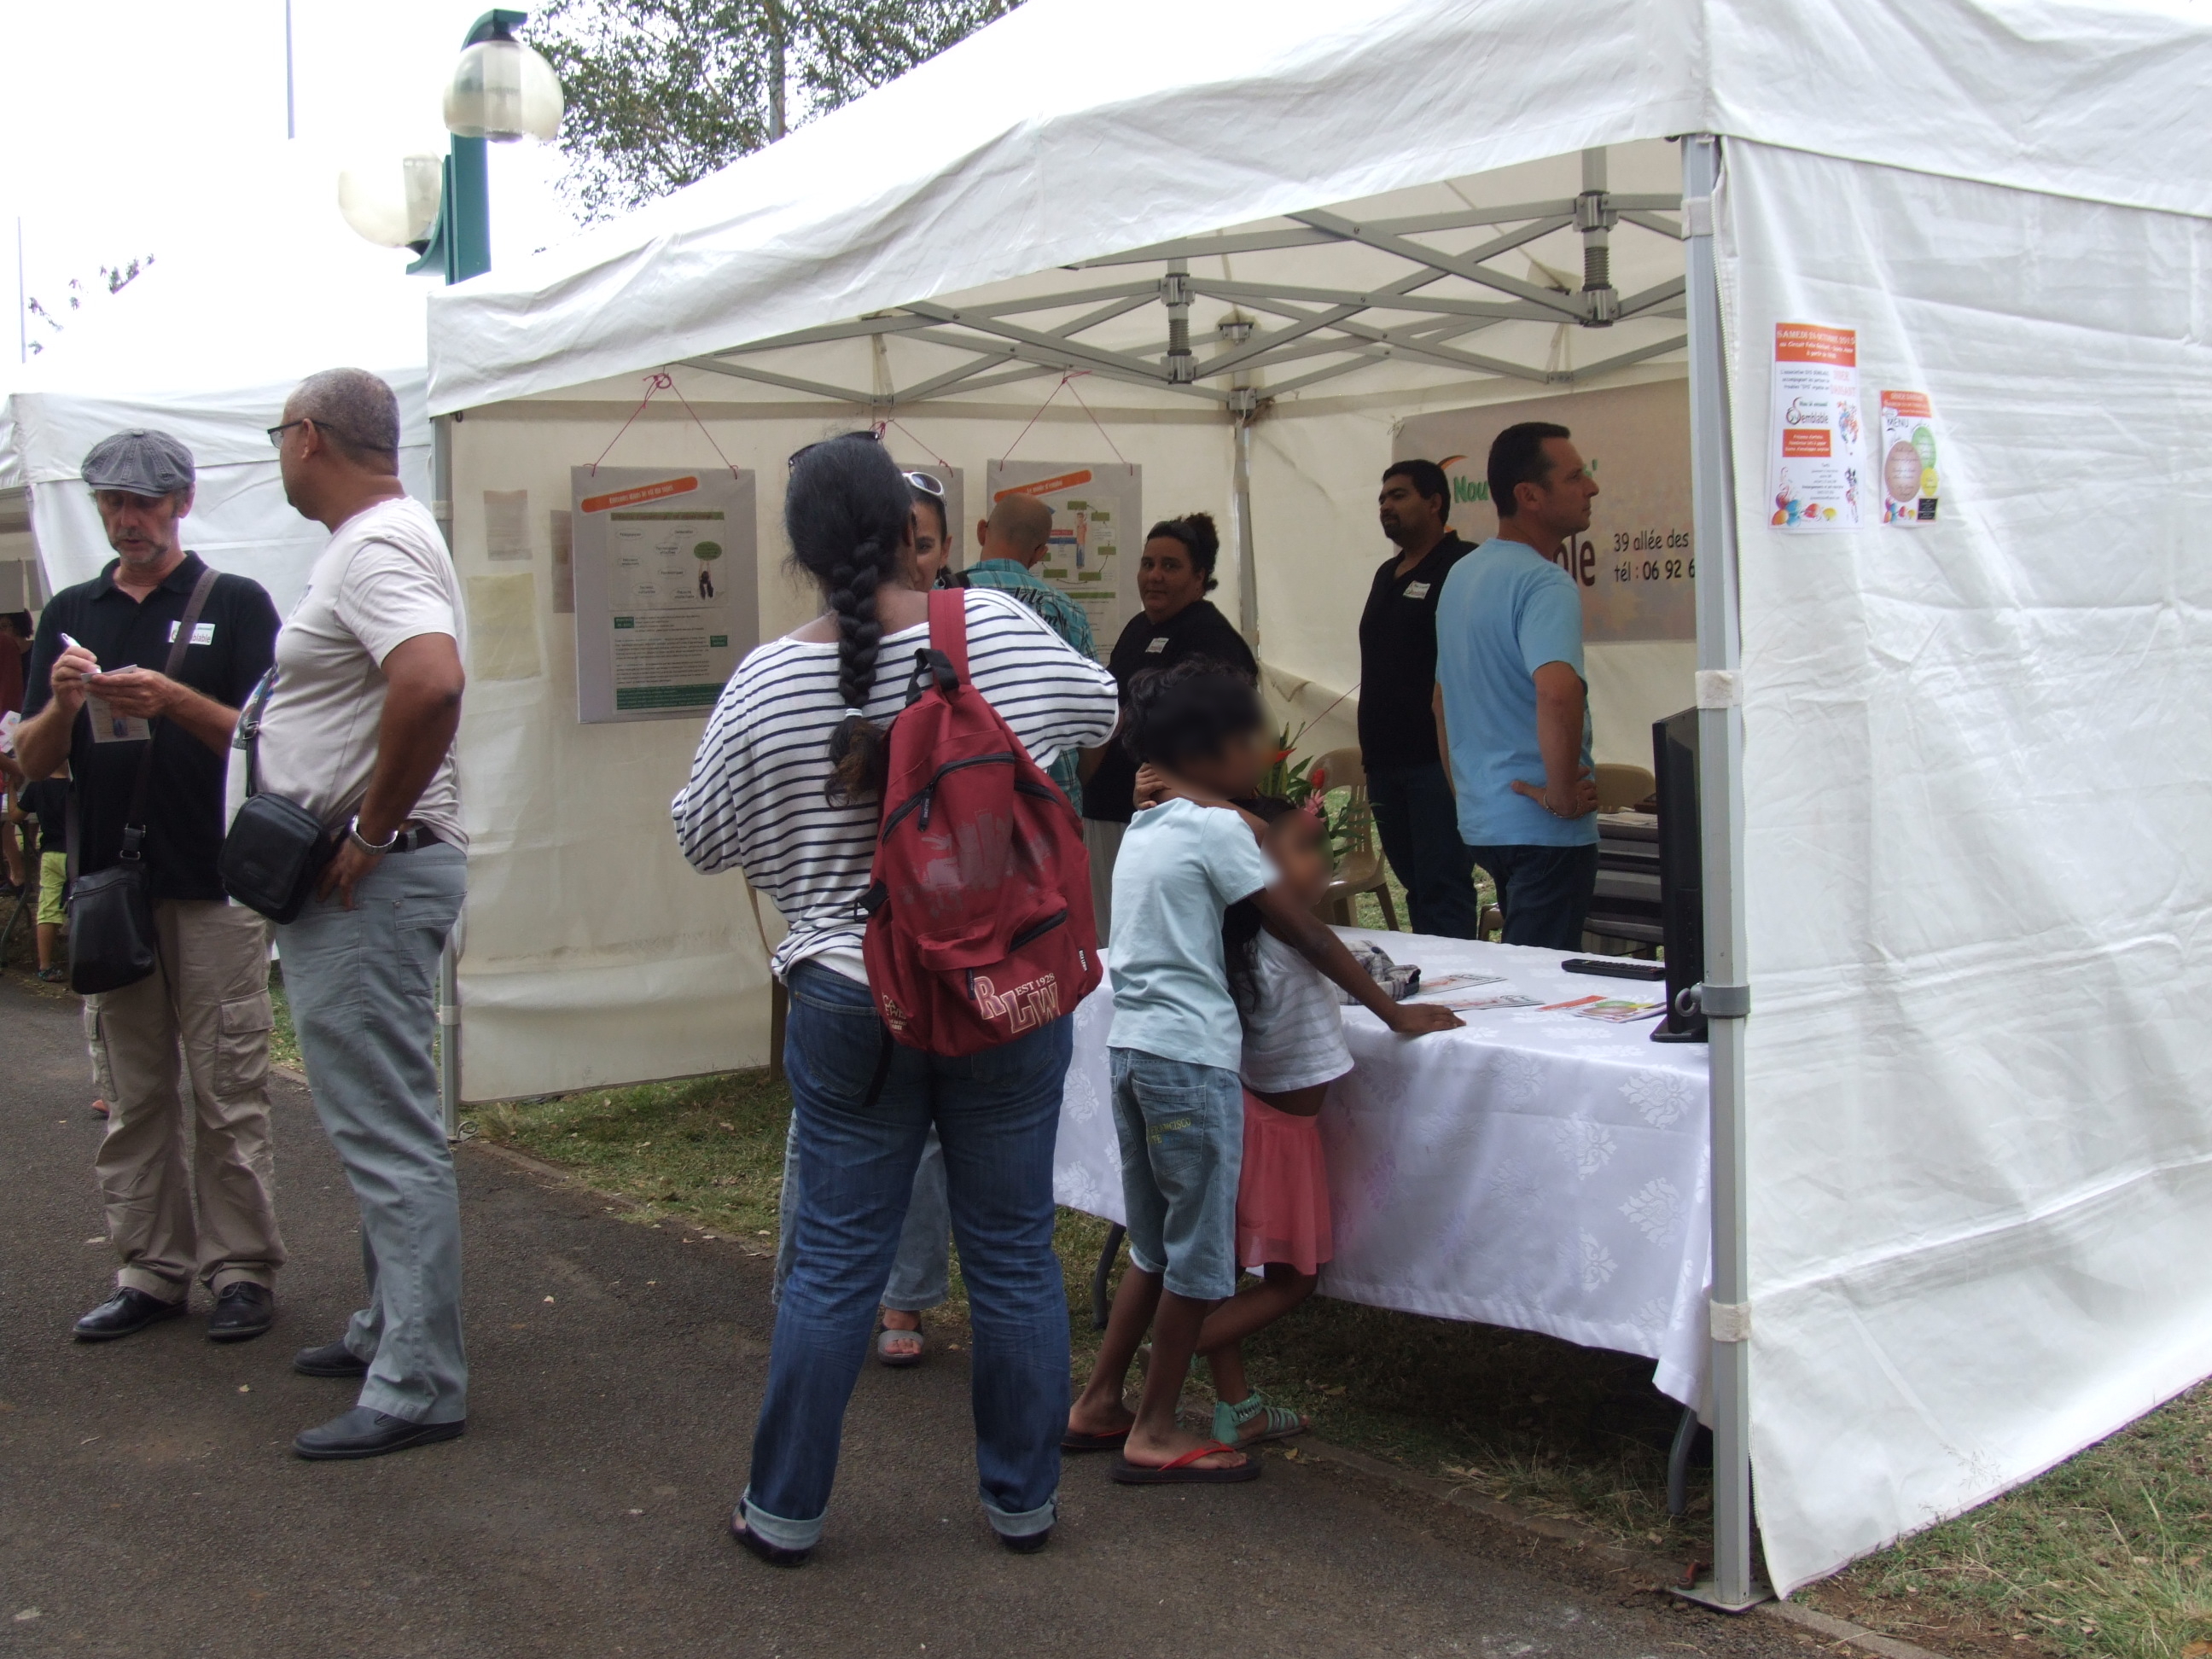 Photo Journee Nationale des Dys 2015 - 13 - Stand DYSsemblable.JPG